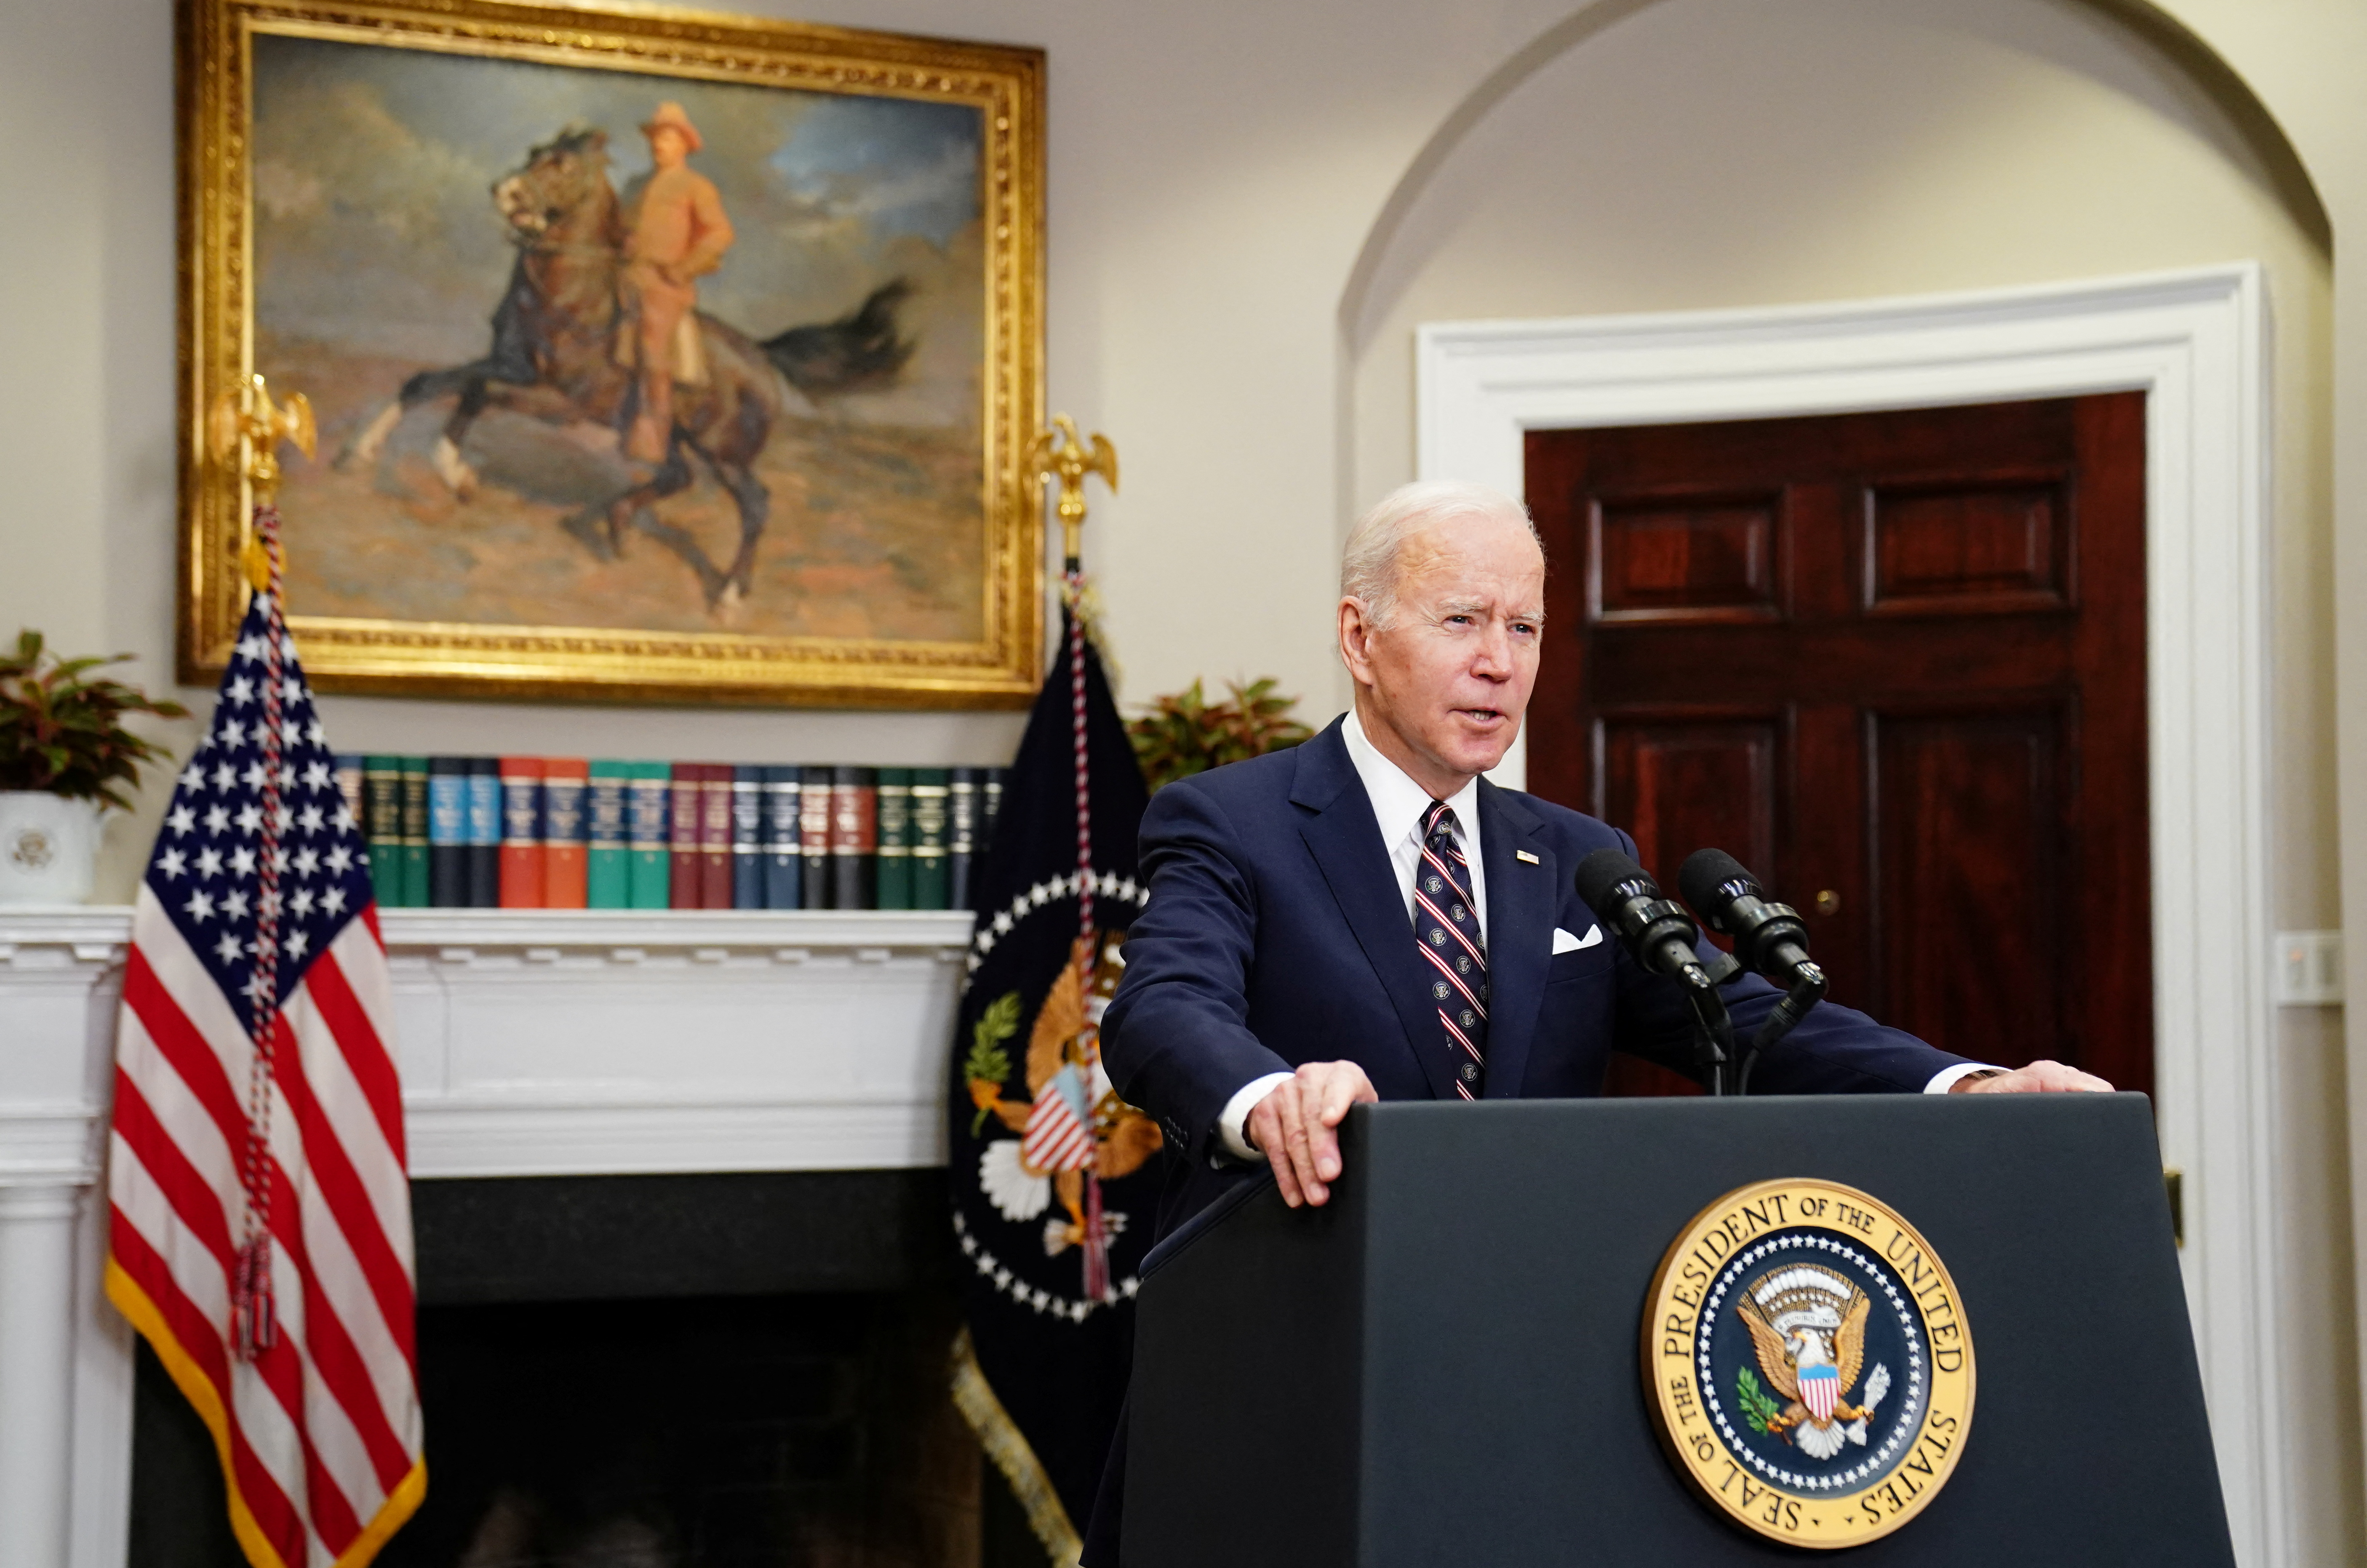 U.S. President Joe Biden speaks about U.S. Special Forces operation in Northern Syria at the White House in Washington